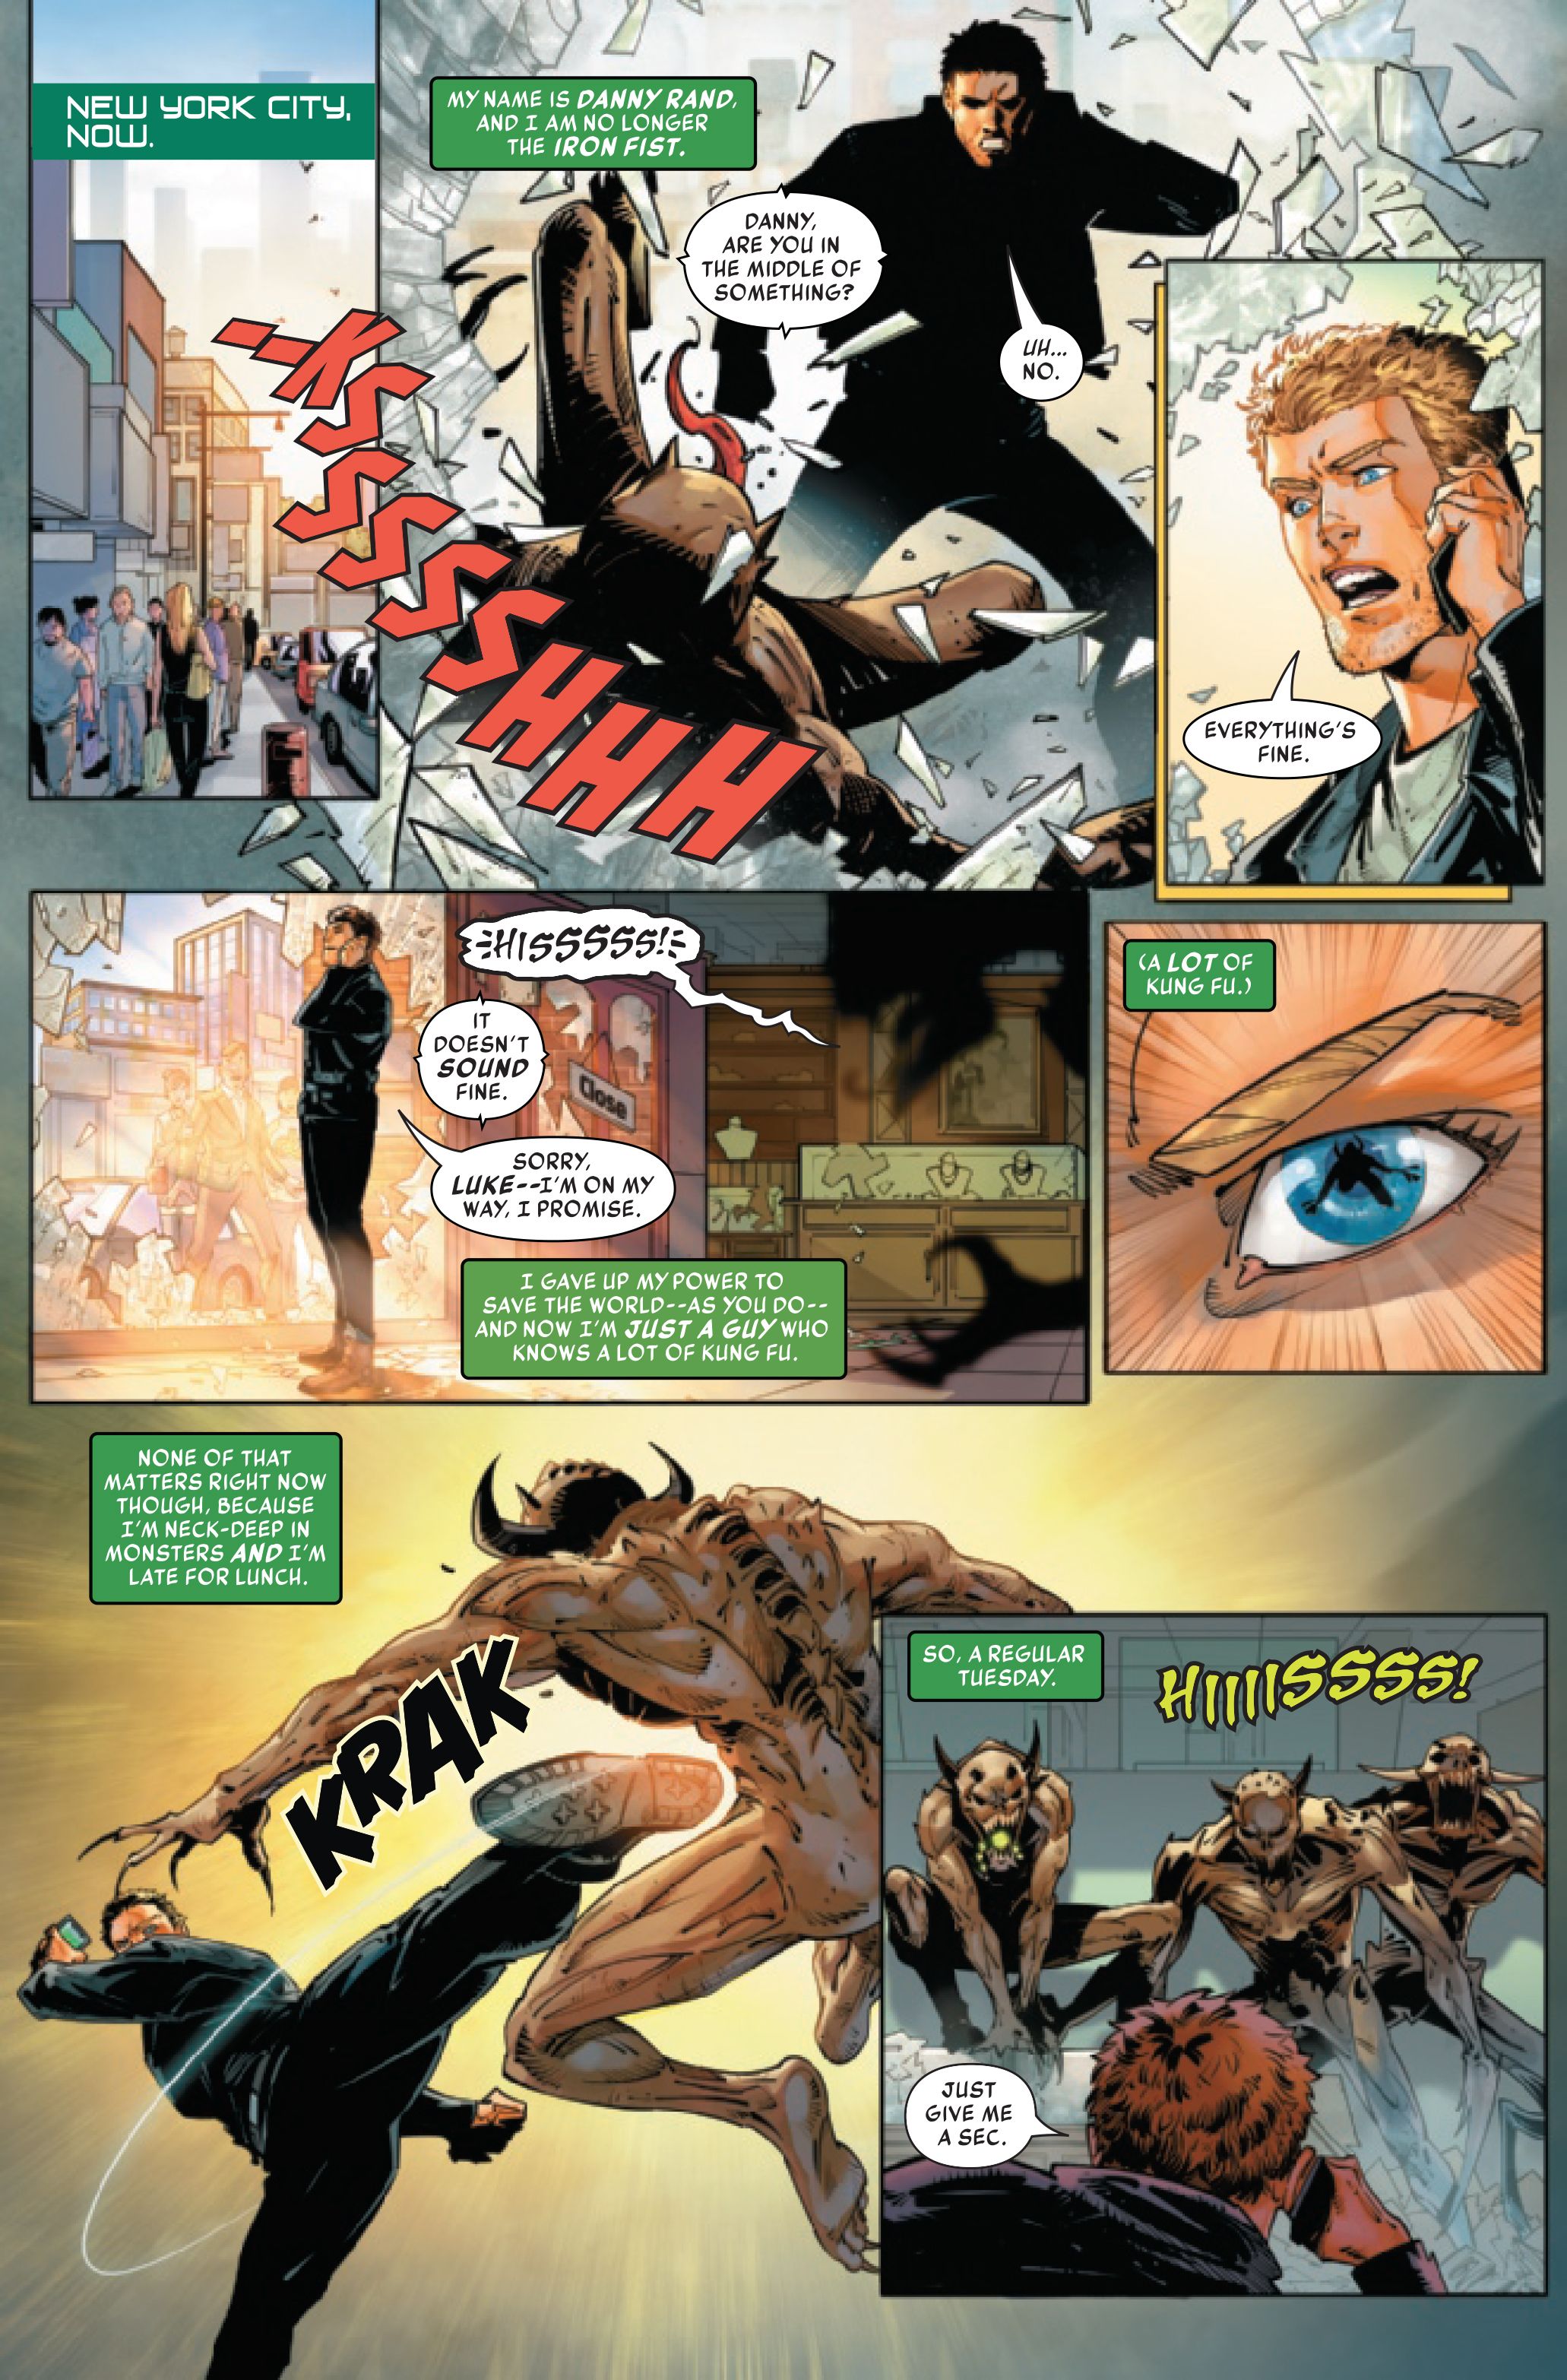 Page 1 of Iron Fist #1